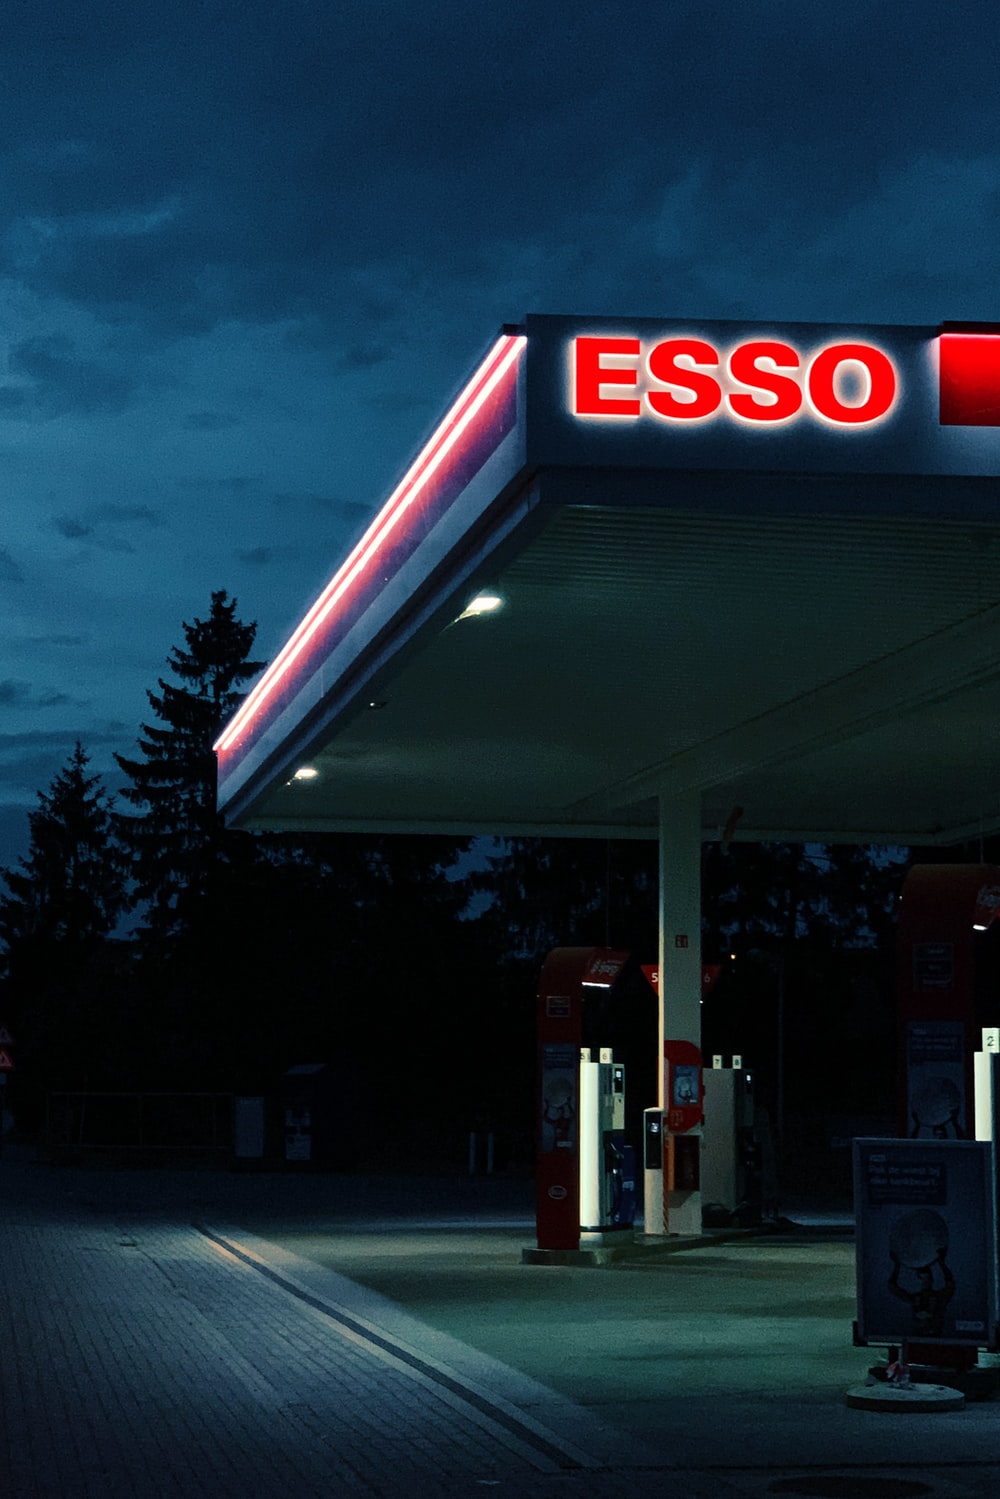 Gas Station Night Picture. Download Free Image